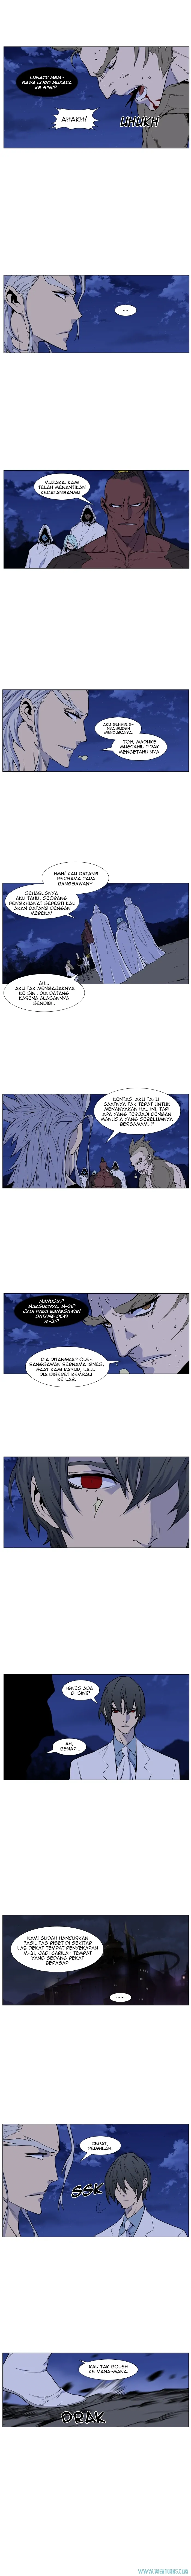 Noblesse Chapter 428 - 57